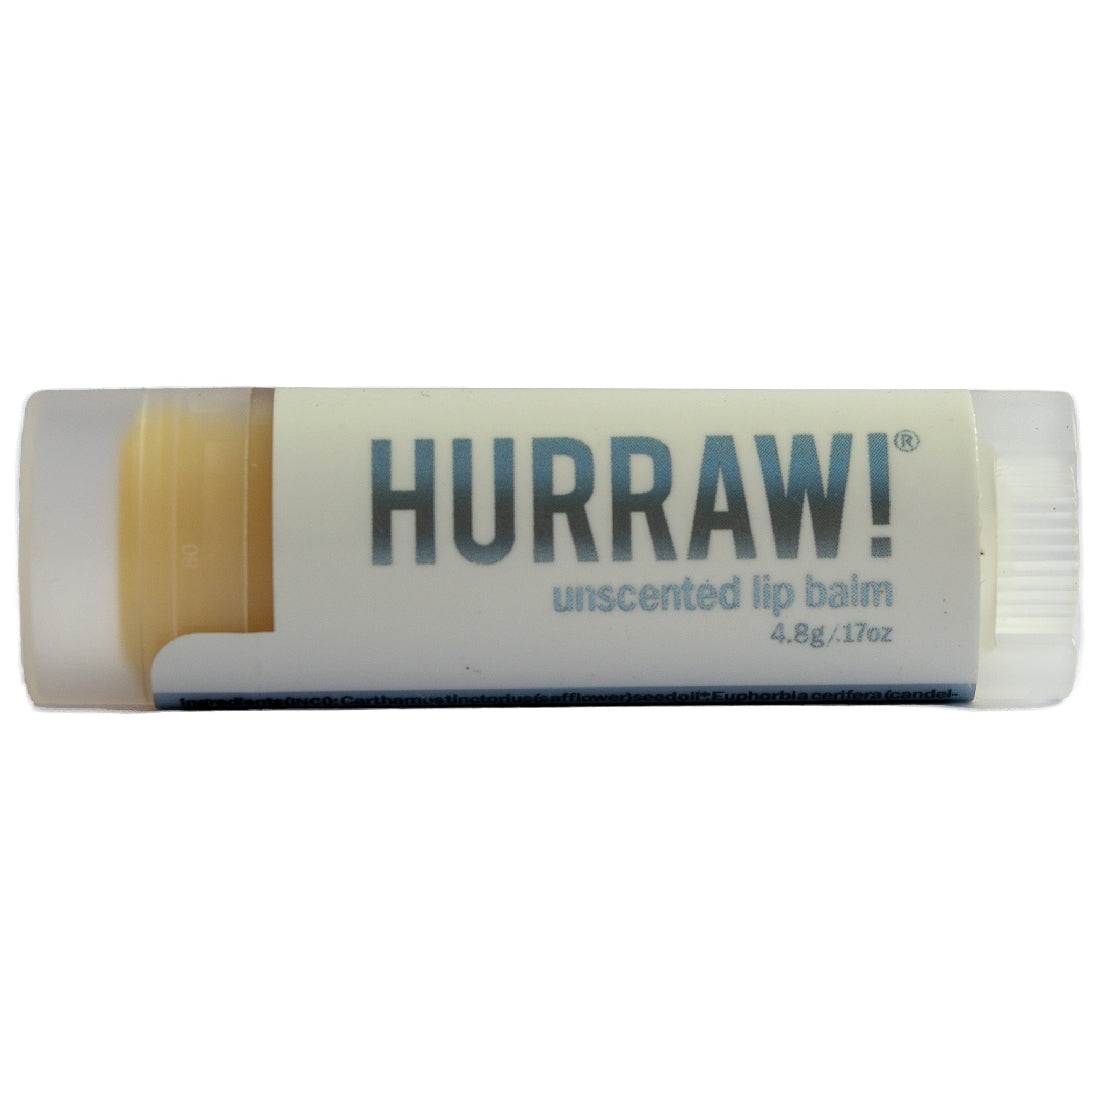 HURRAW LIPBALM UNSCENTED